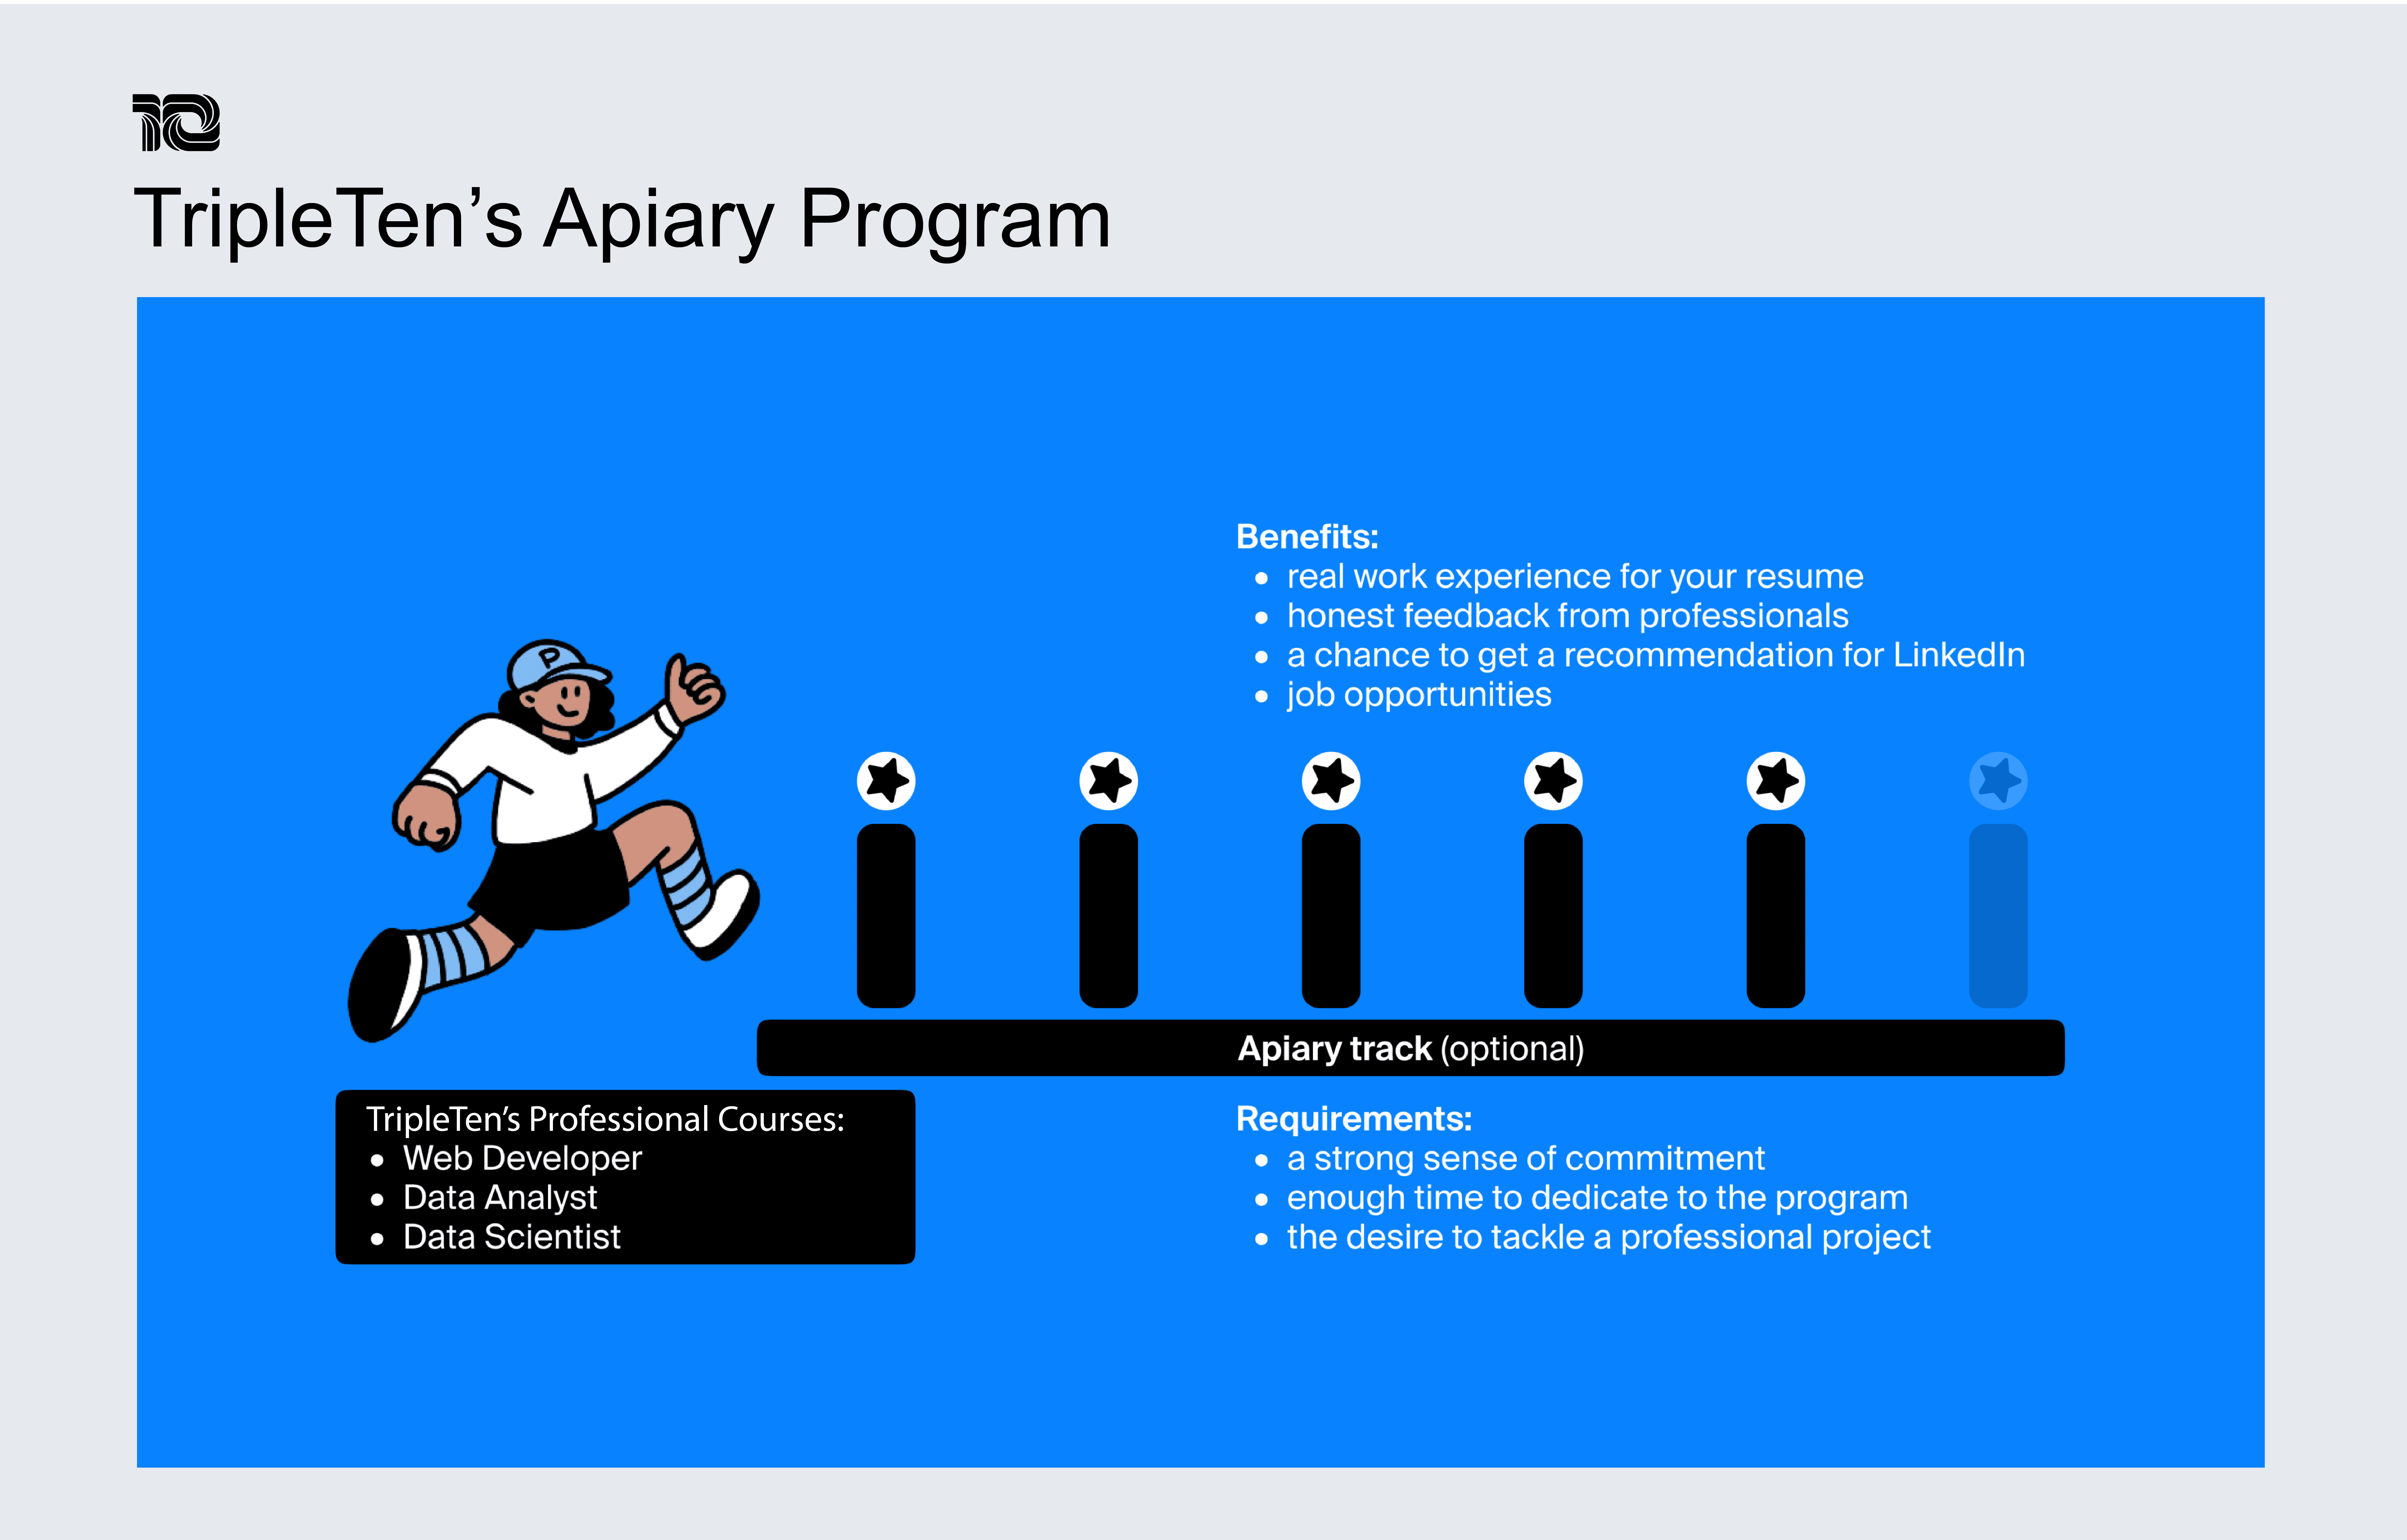 Infographic showing the details of TripleTen’s Apiary Program